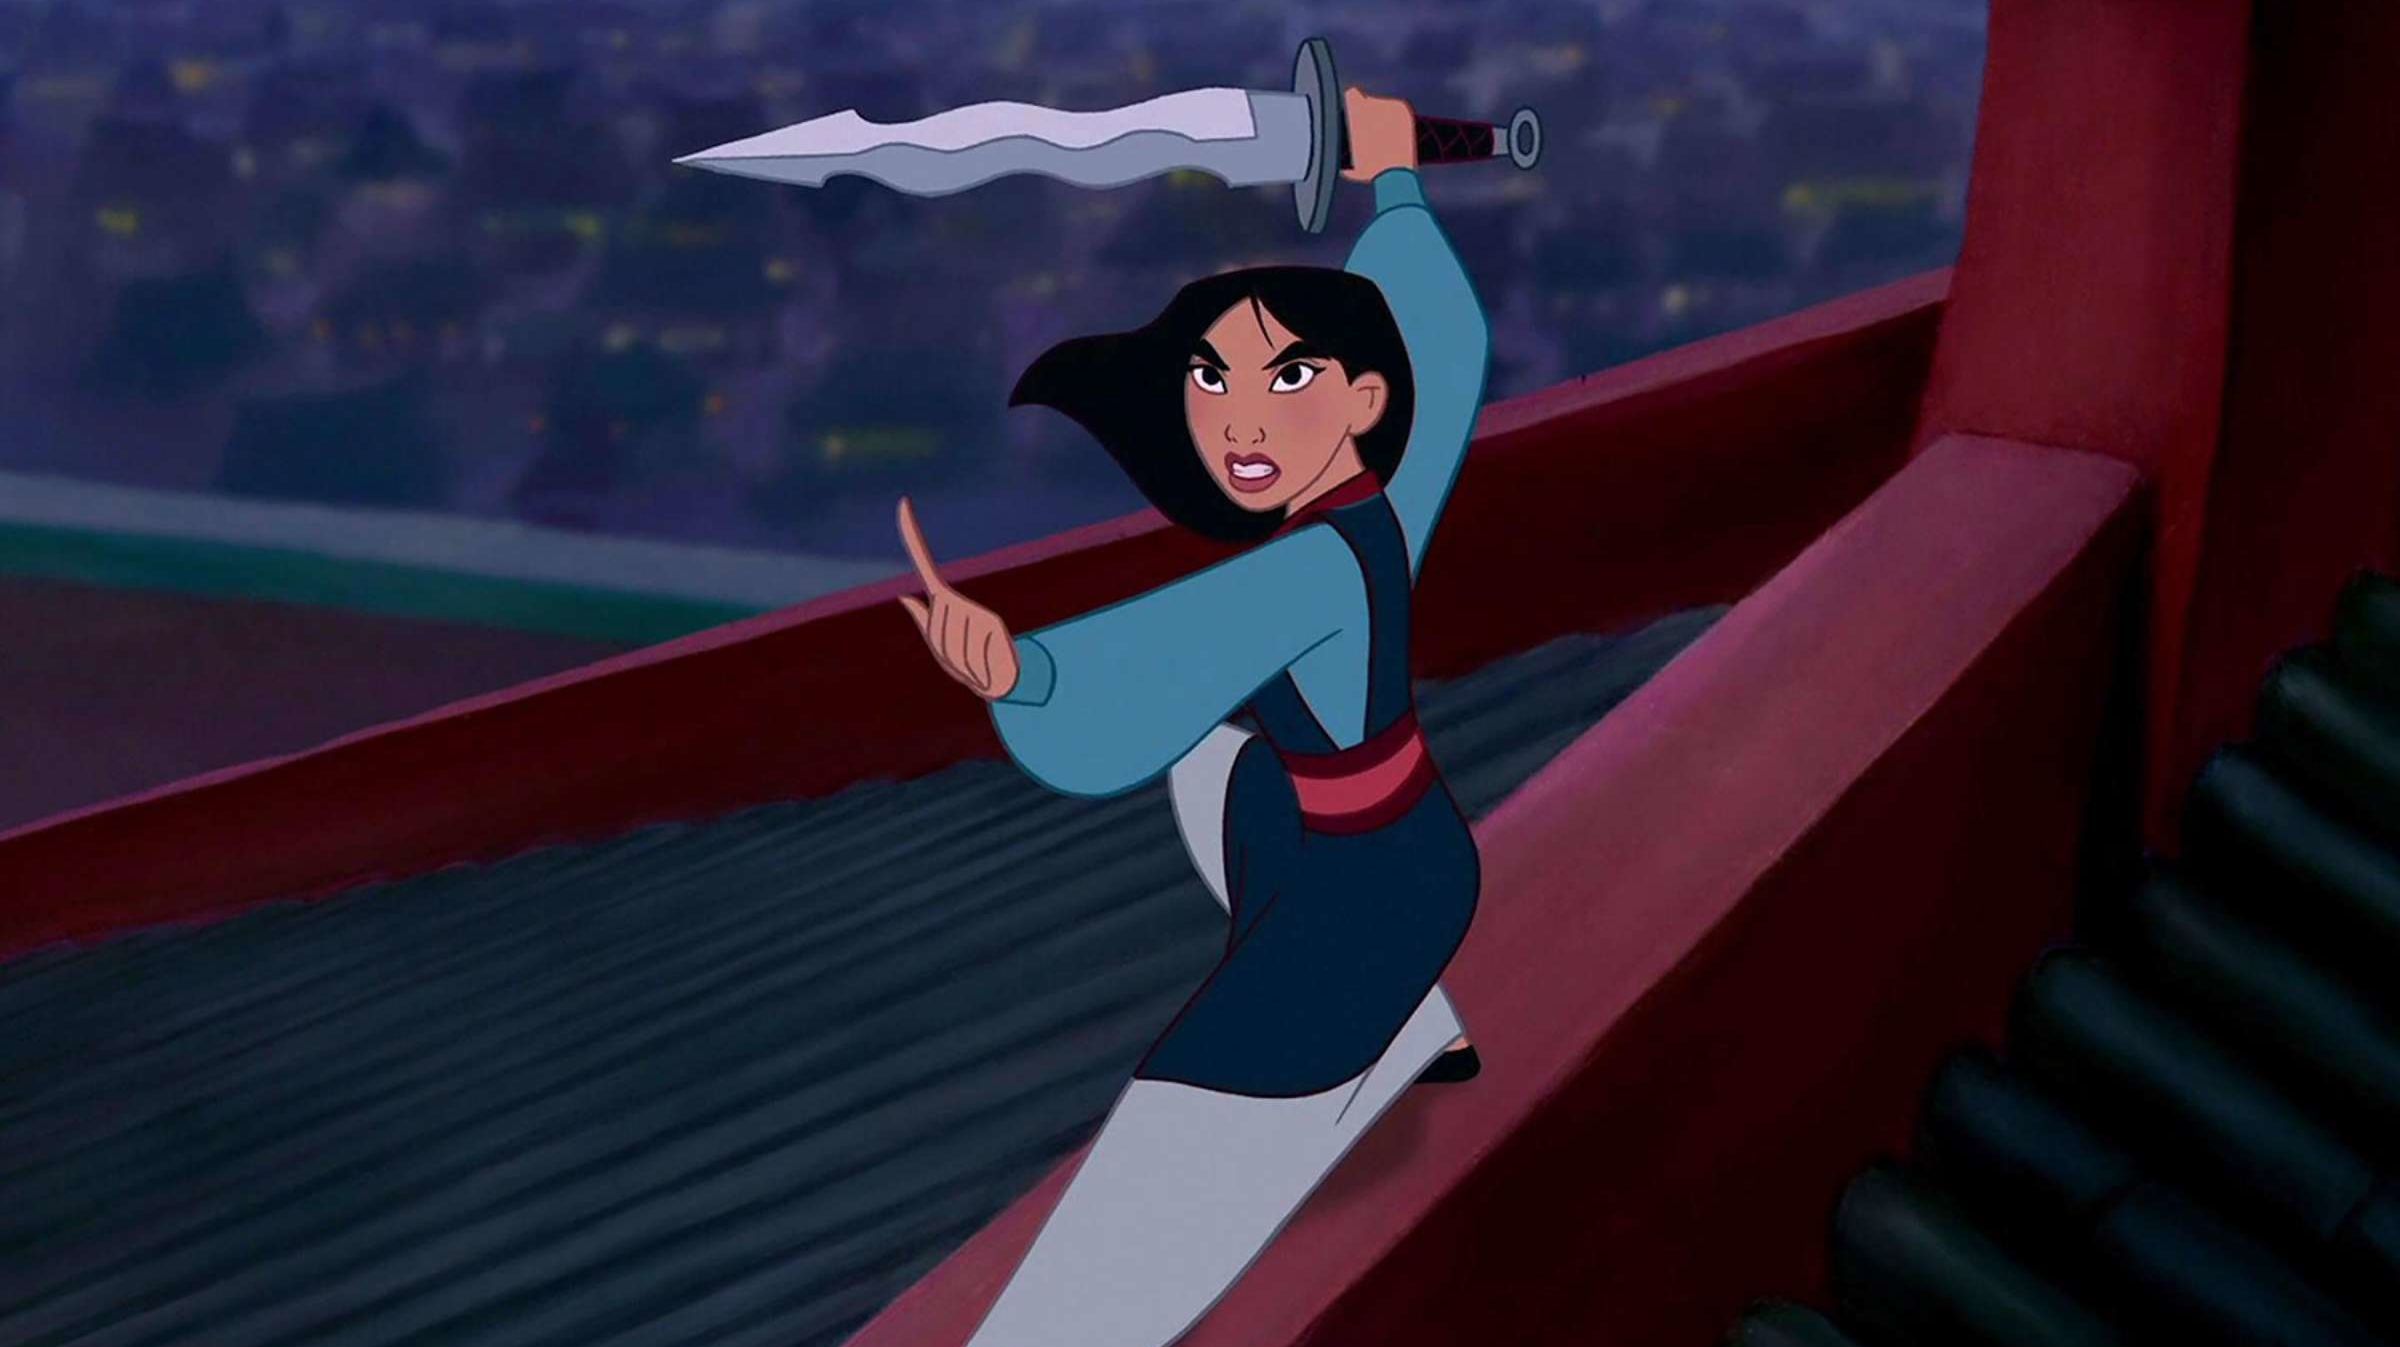 Mulan stands ready to defend China on a rooftop.